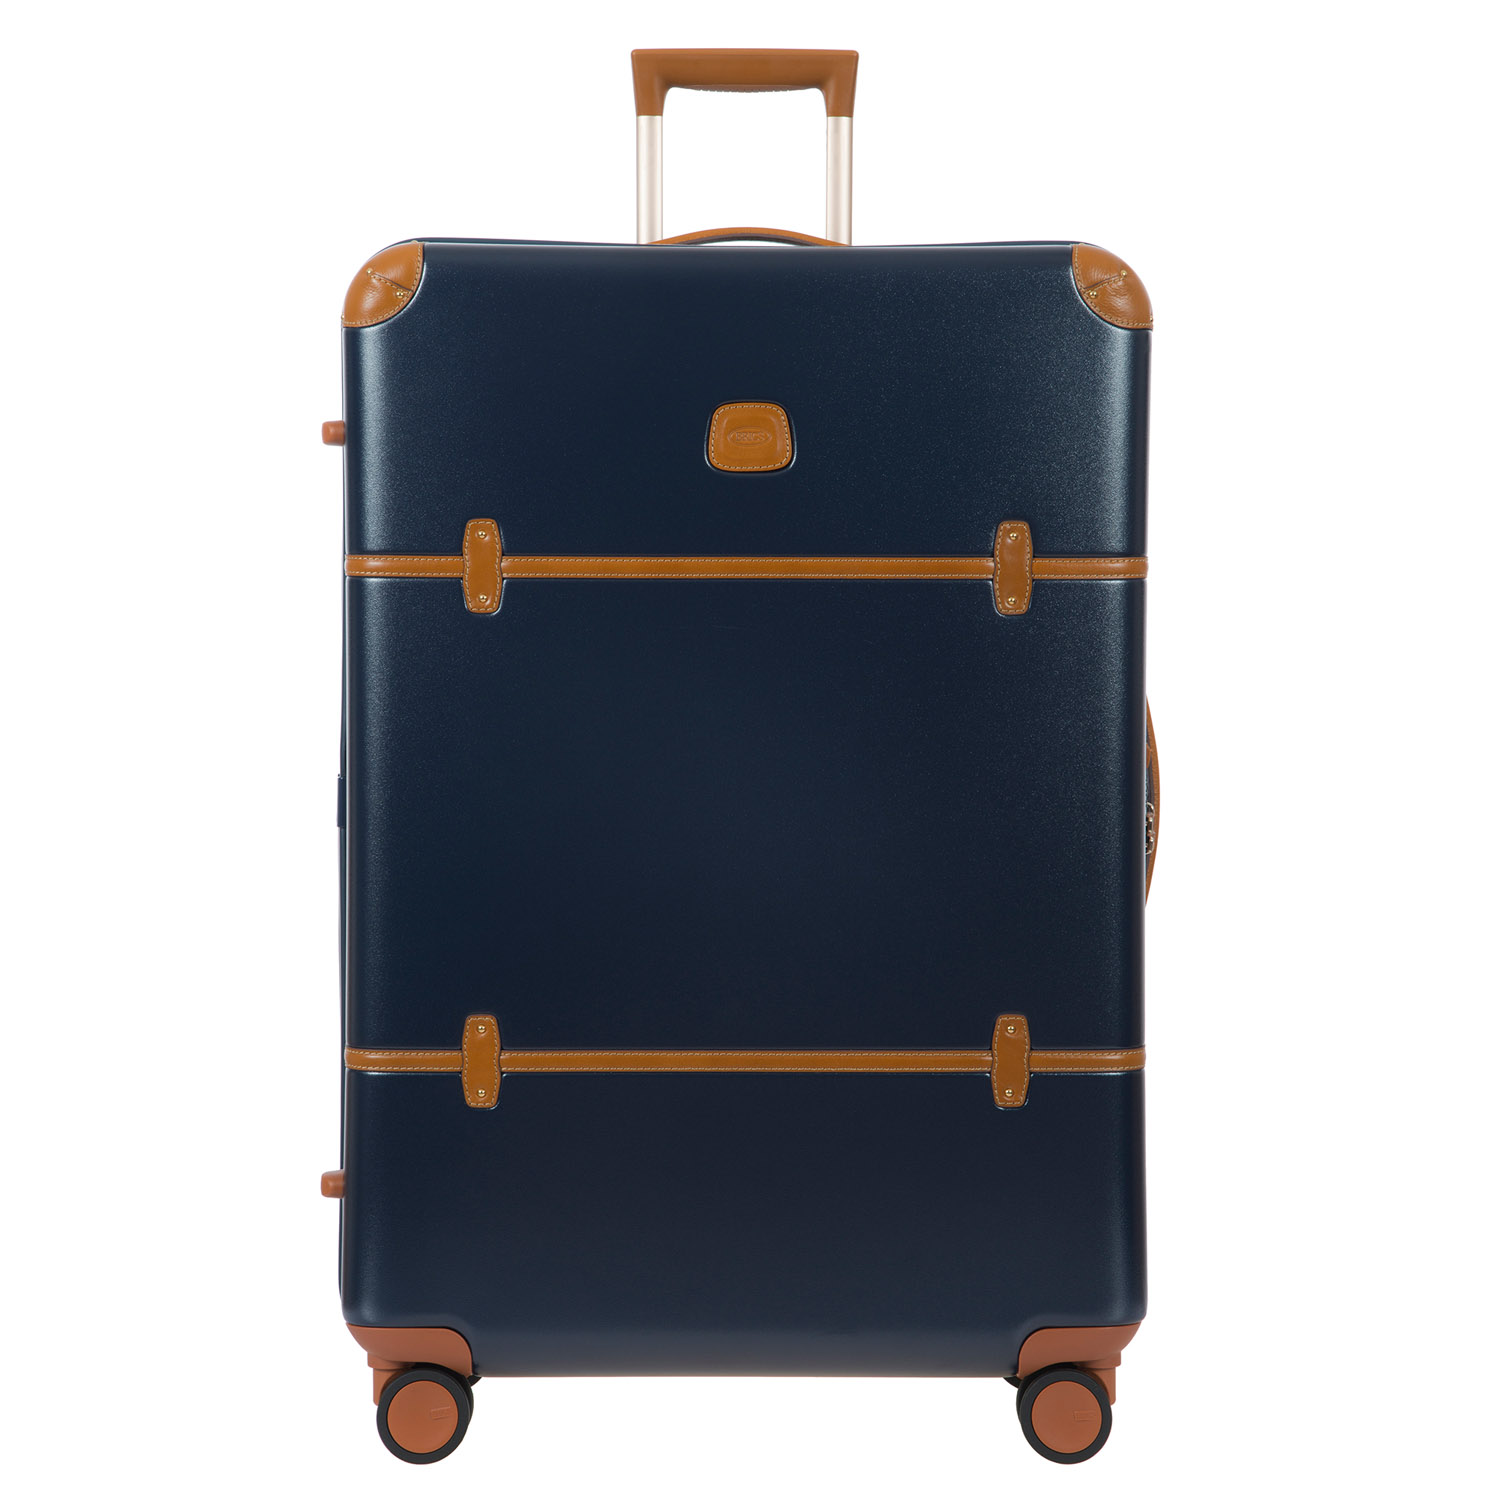 Bellagio 32" Spinner Trunk by Brics (Color: Blue)